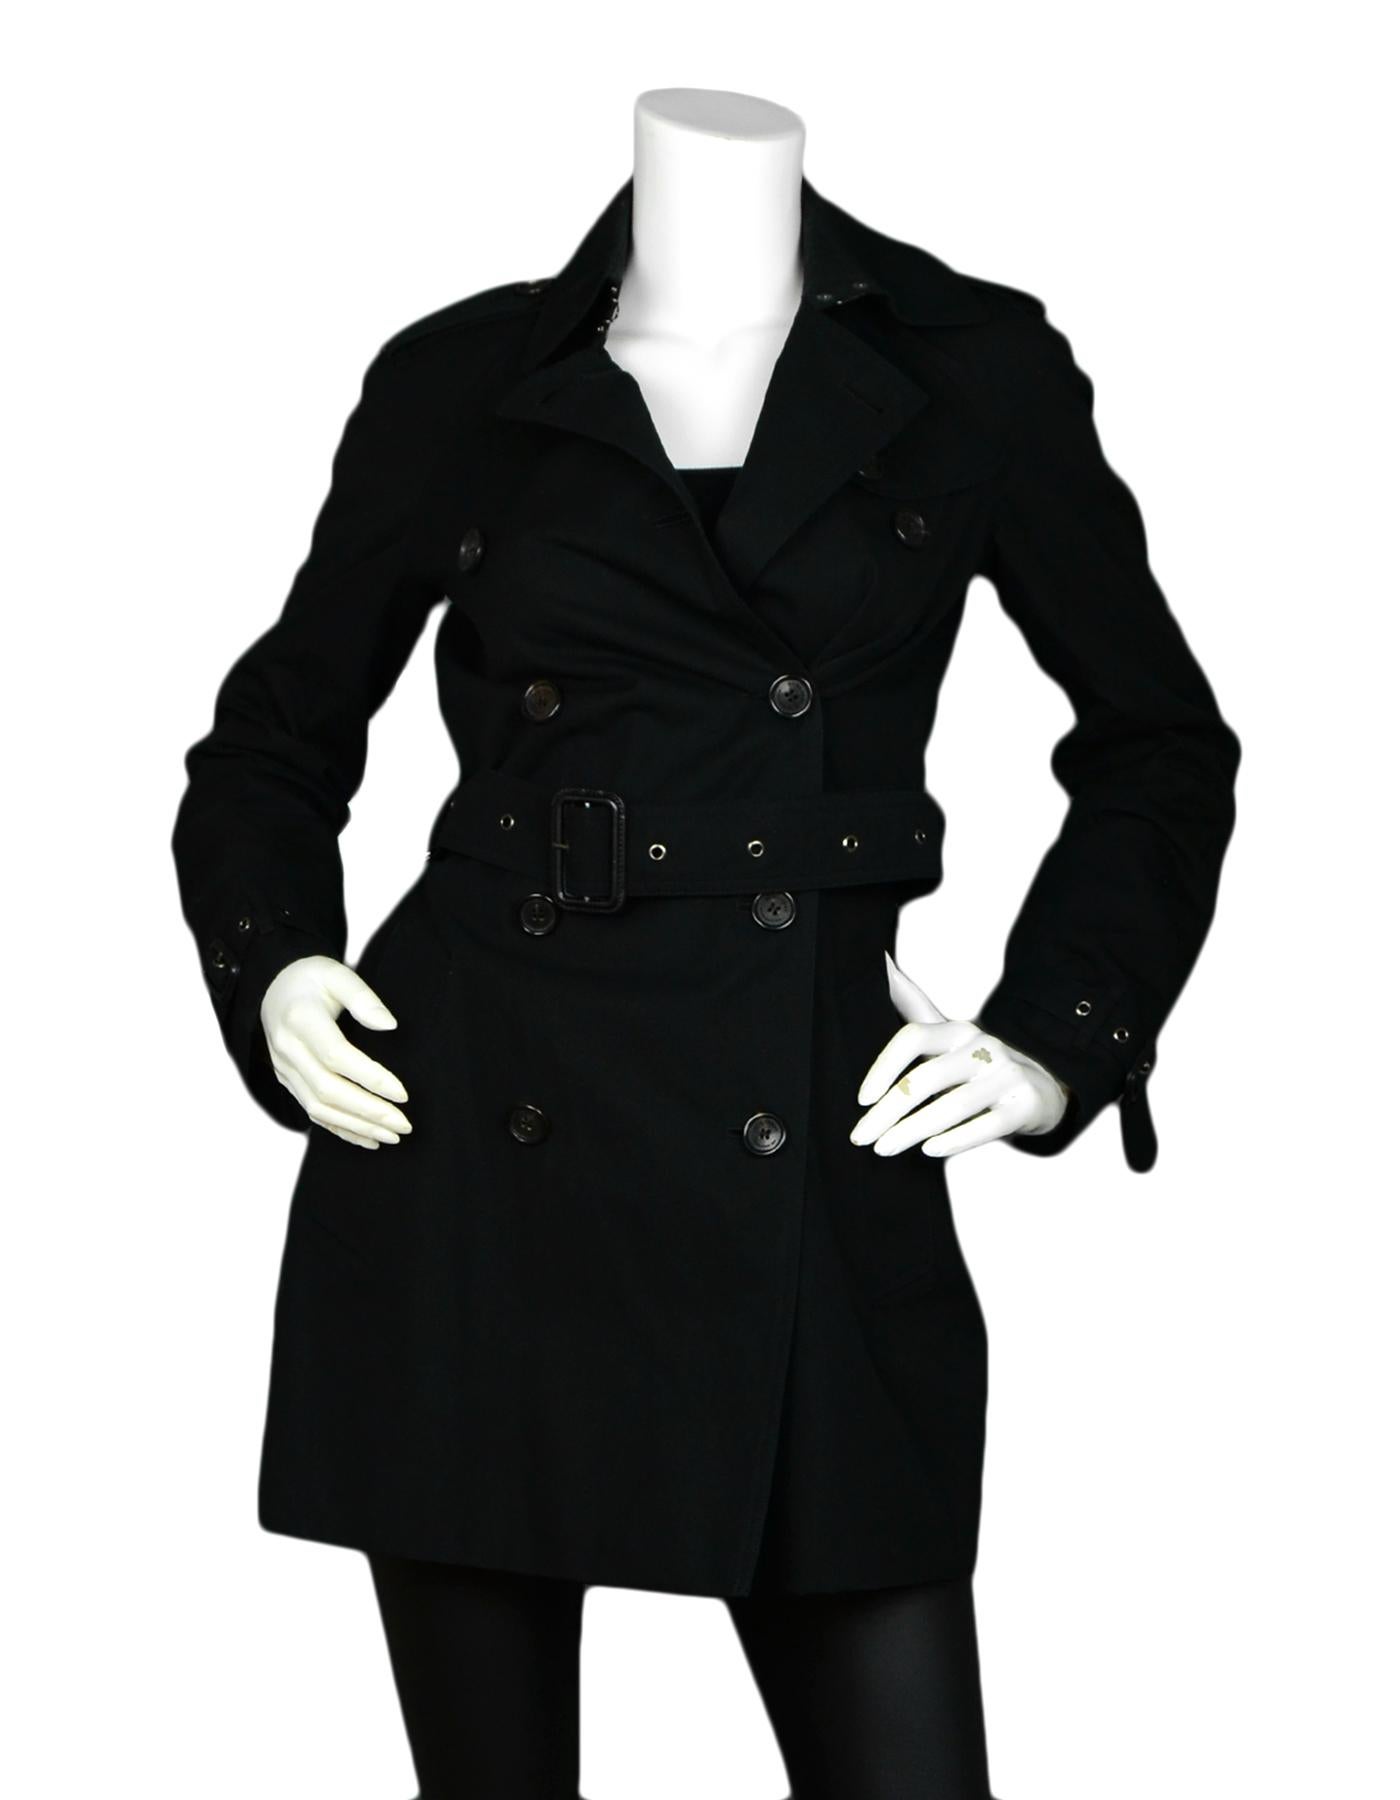 Burberry Prorsum Black Cotton Trench Coat w/ Belt sz 2

Made In: England
Color: Black
Materials: 100% Cotton
Lining: 100% Cotton
Opening/Closure: Front buttons
Overall Condition: Excellent pre-owned condition
Includes: Belt

Tag Size: 2 *Please